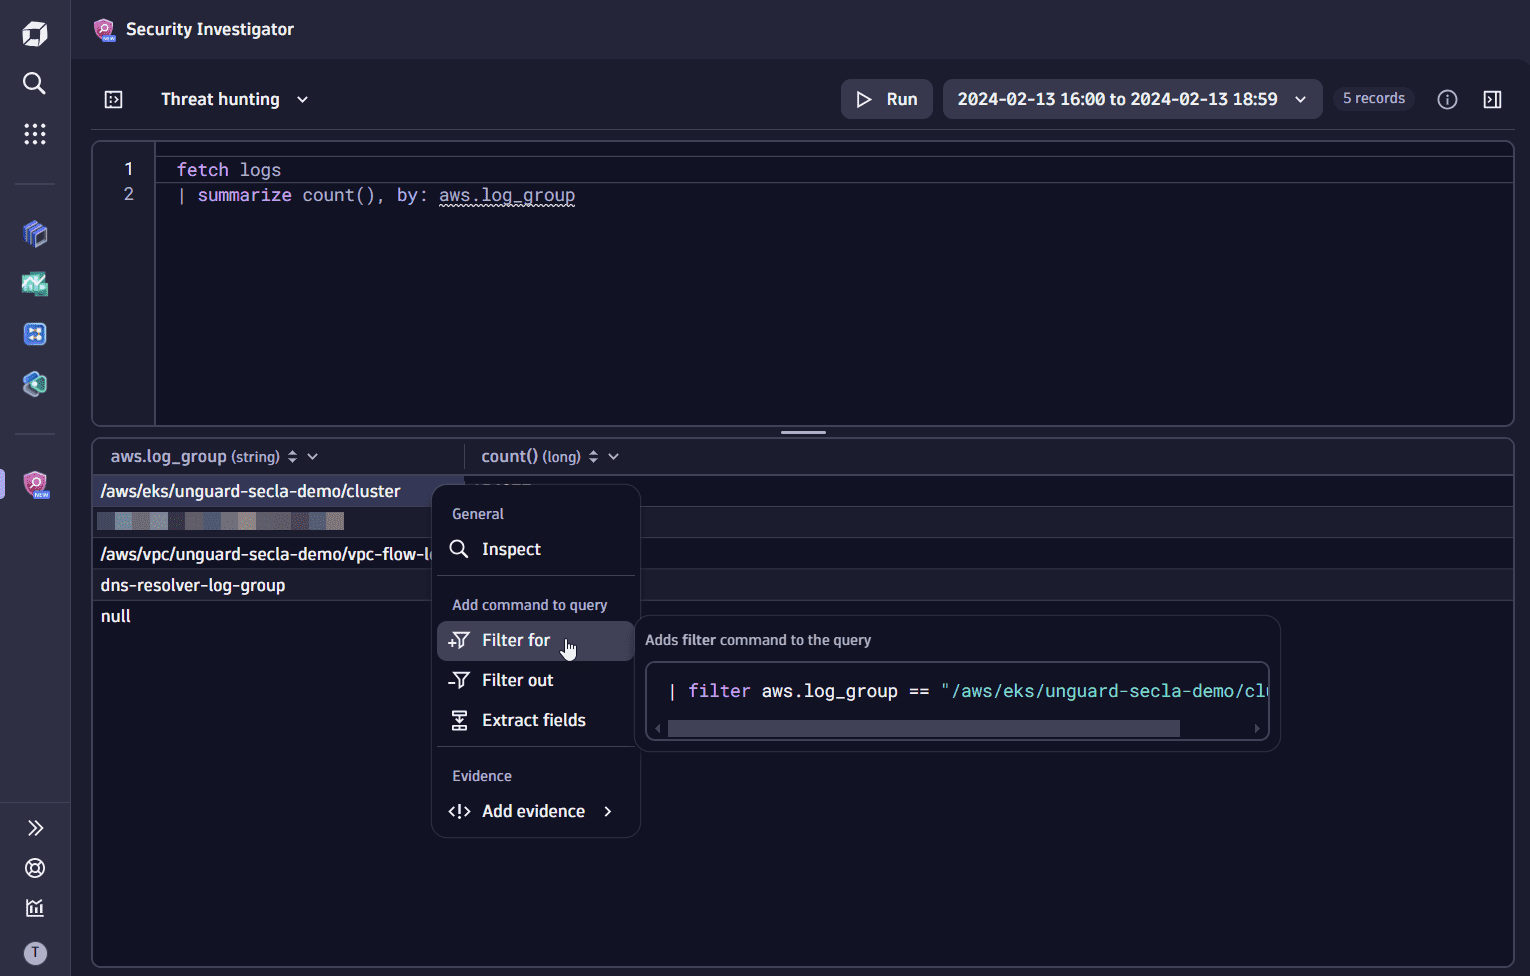 Add a filter for the log group name